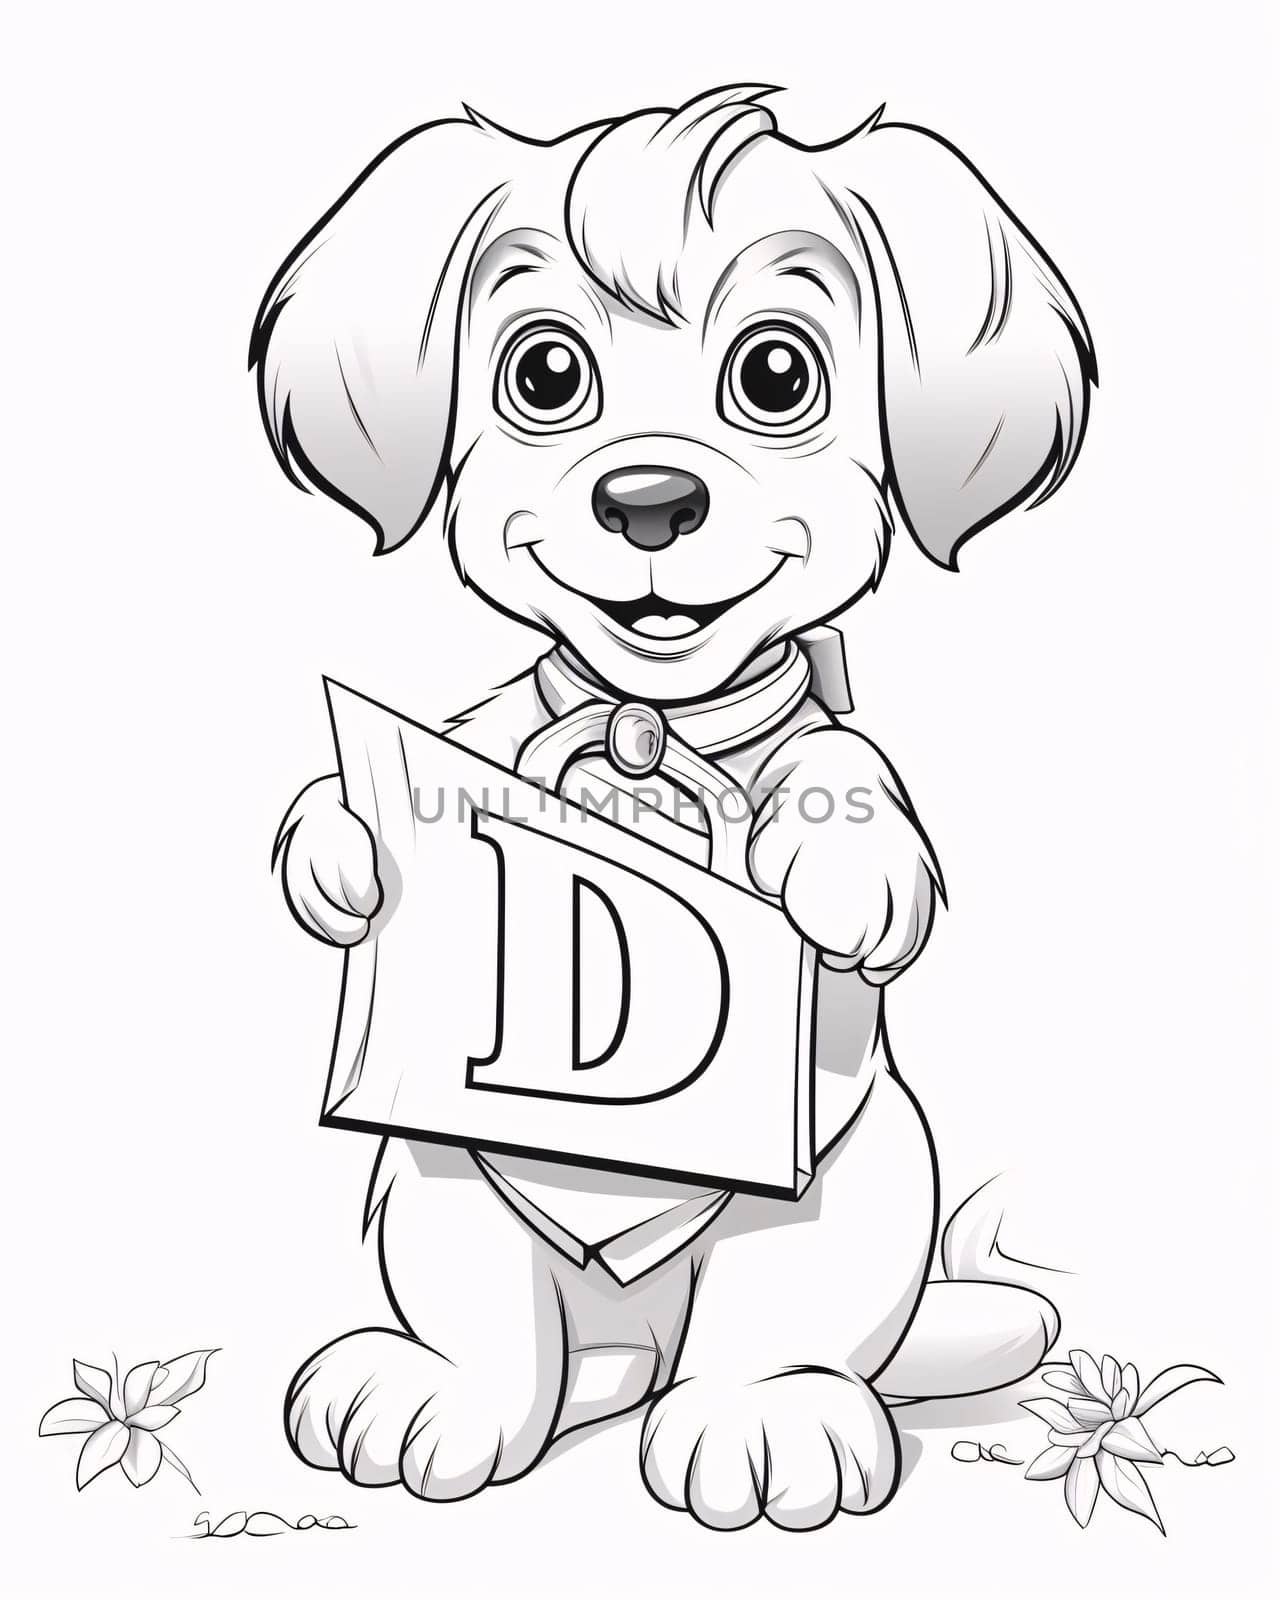 Illustration of a Cute Puppy Holding a Letter D. by ThemesS